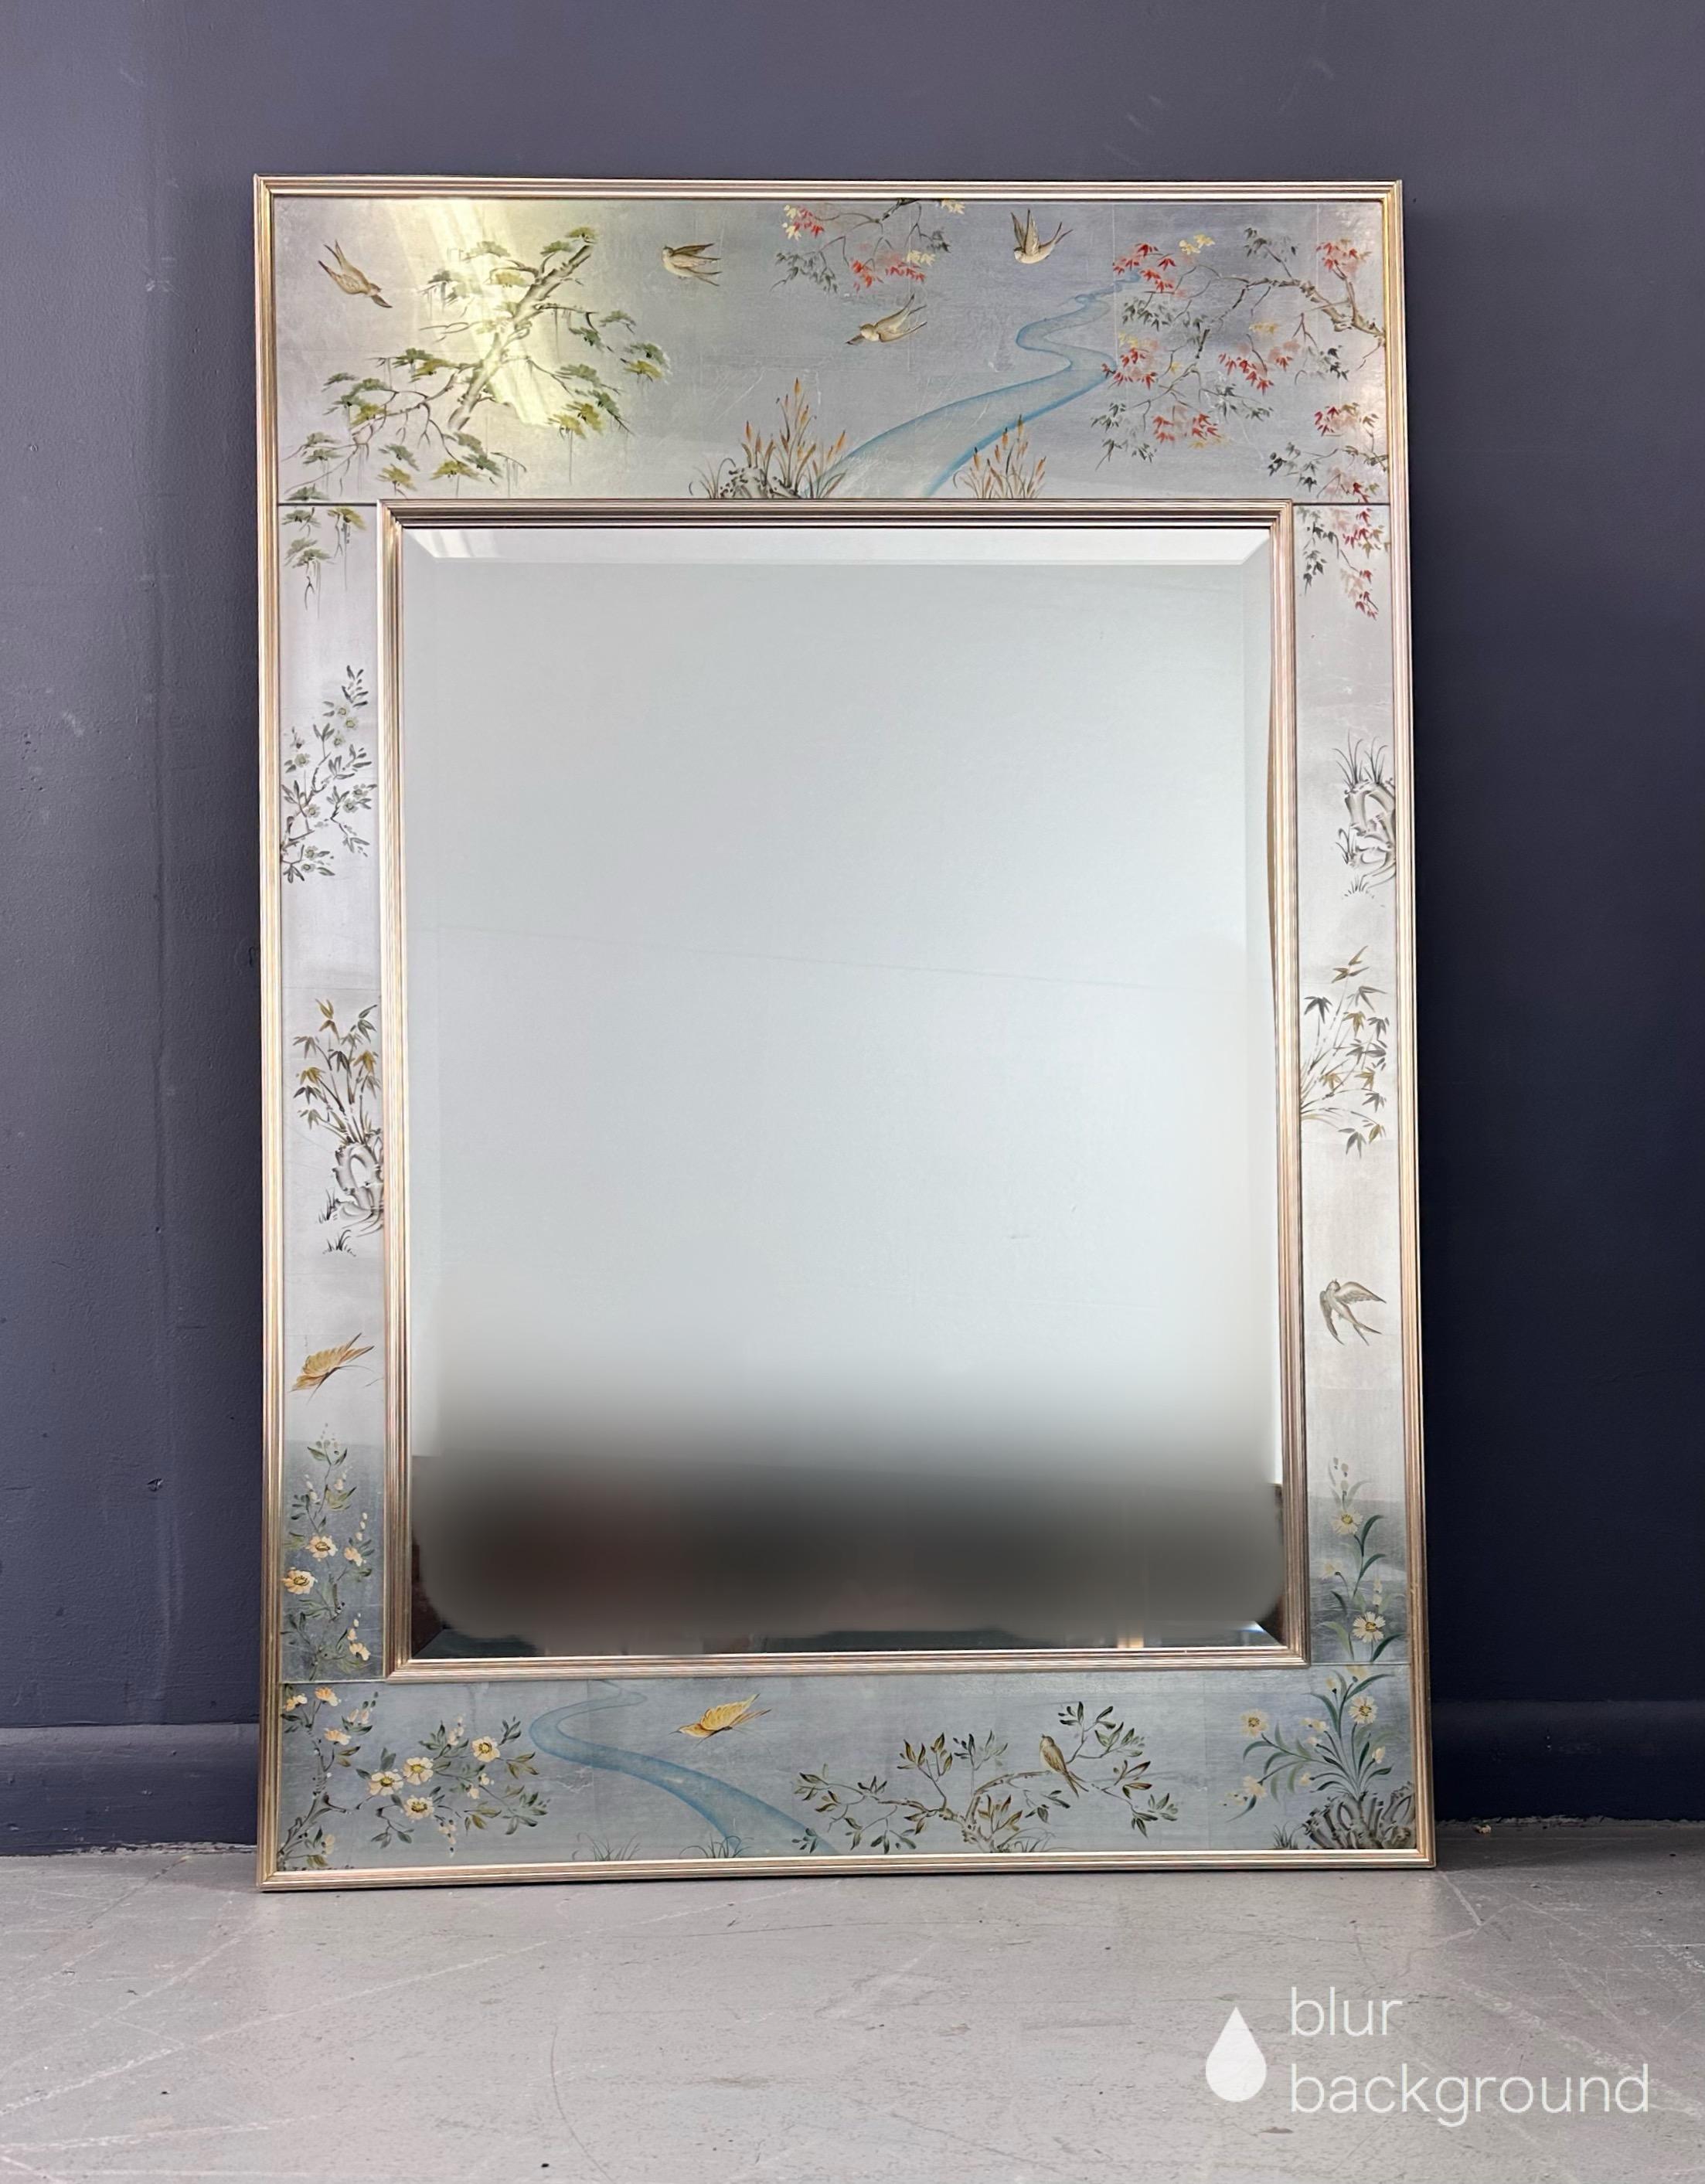 Chinoiserie style mirror with silver leaf eglomise panels depicting various nature scenes of flora and water falls. Panels surround a beveled mirror center, all in a metal surround.